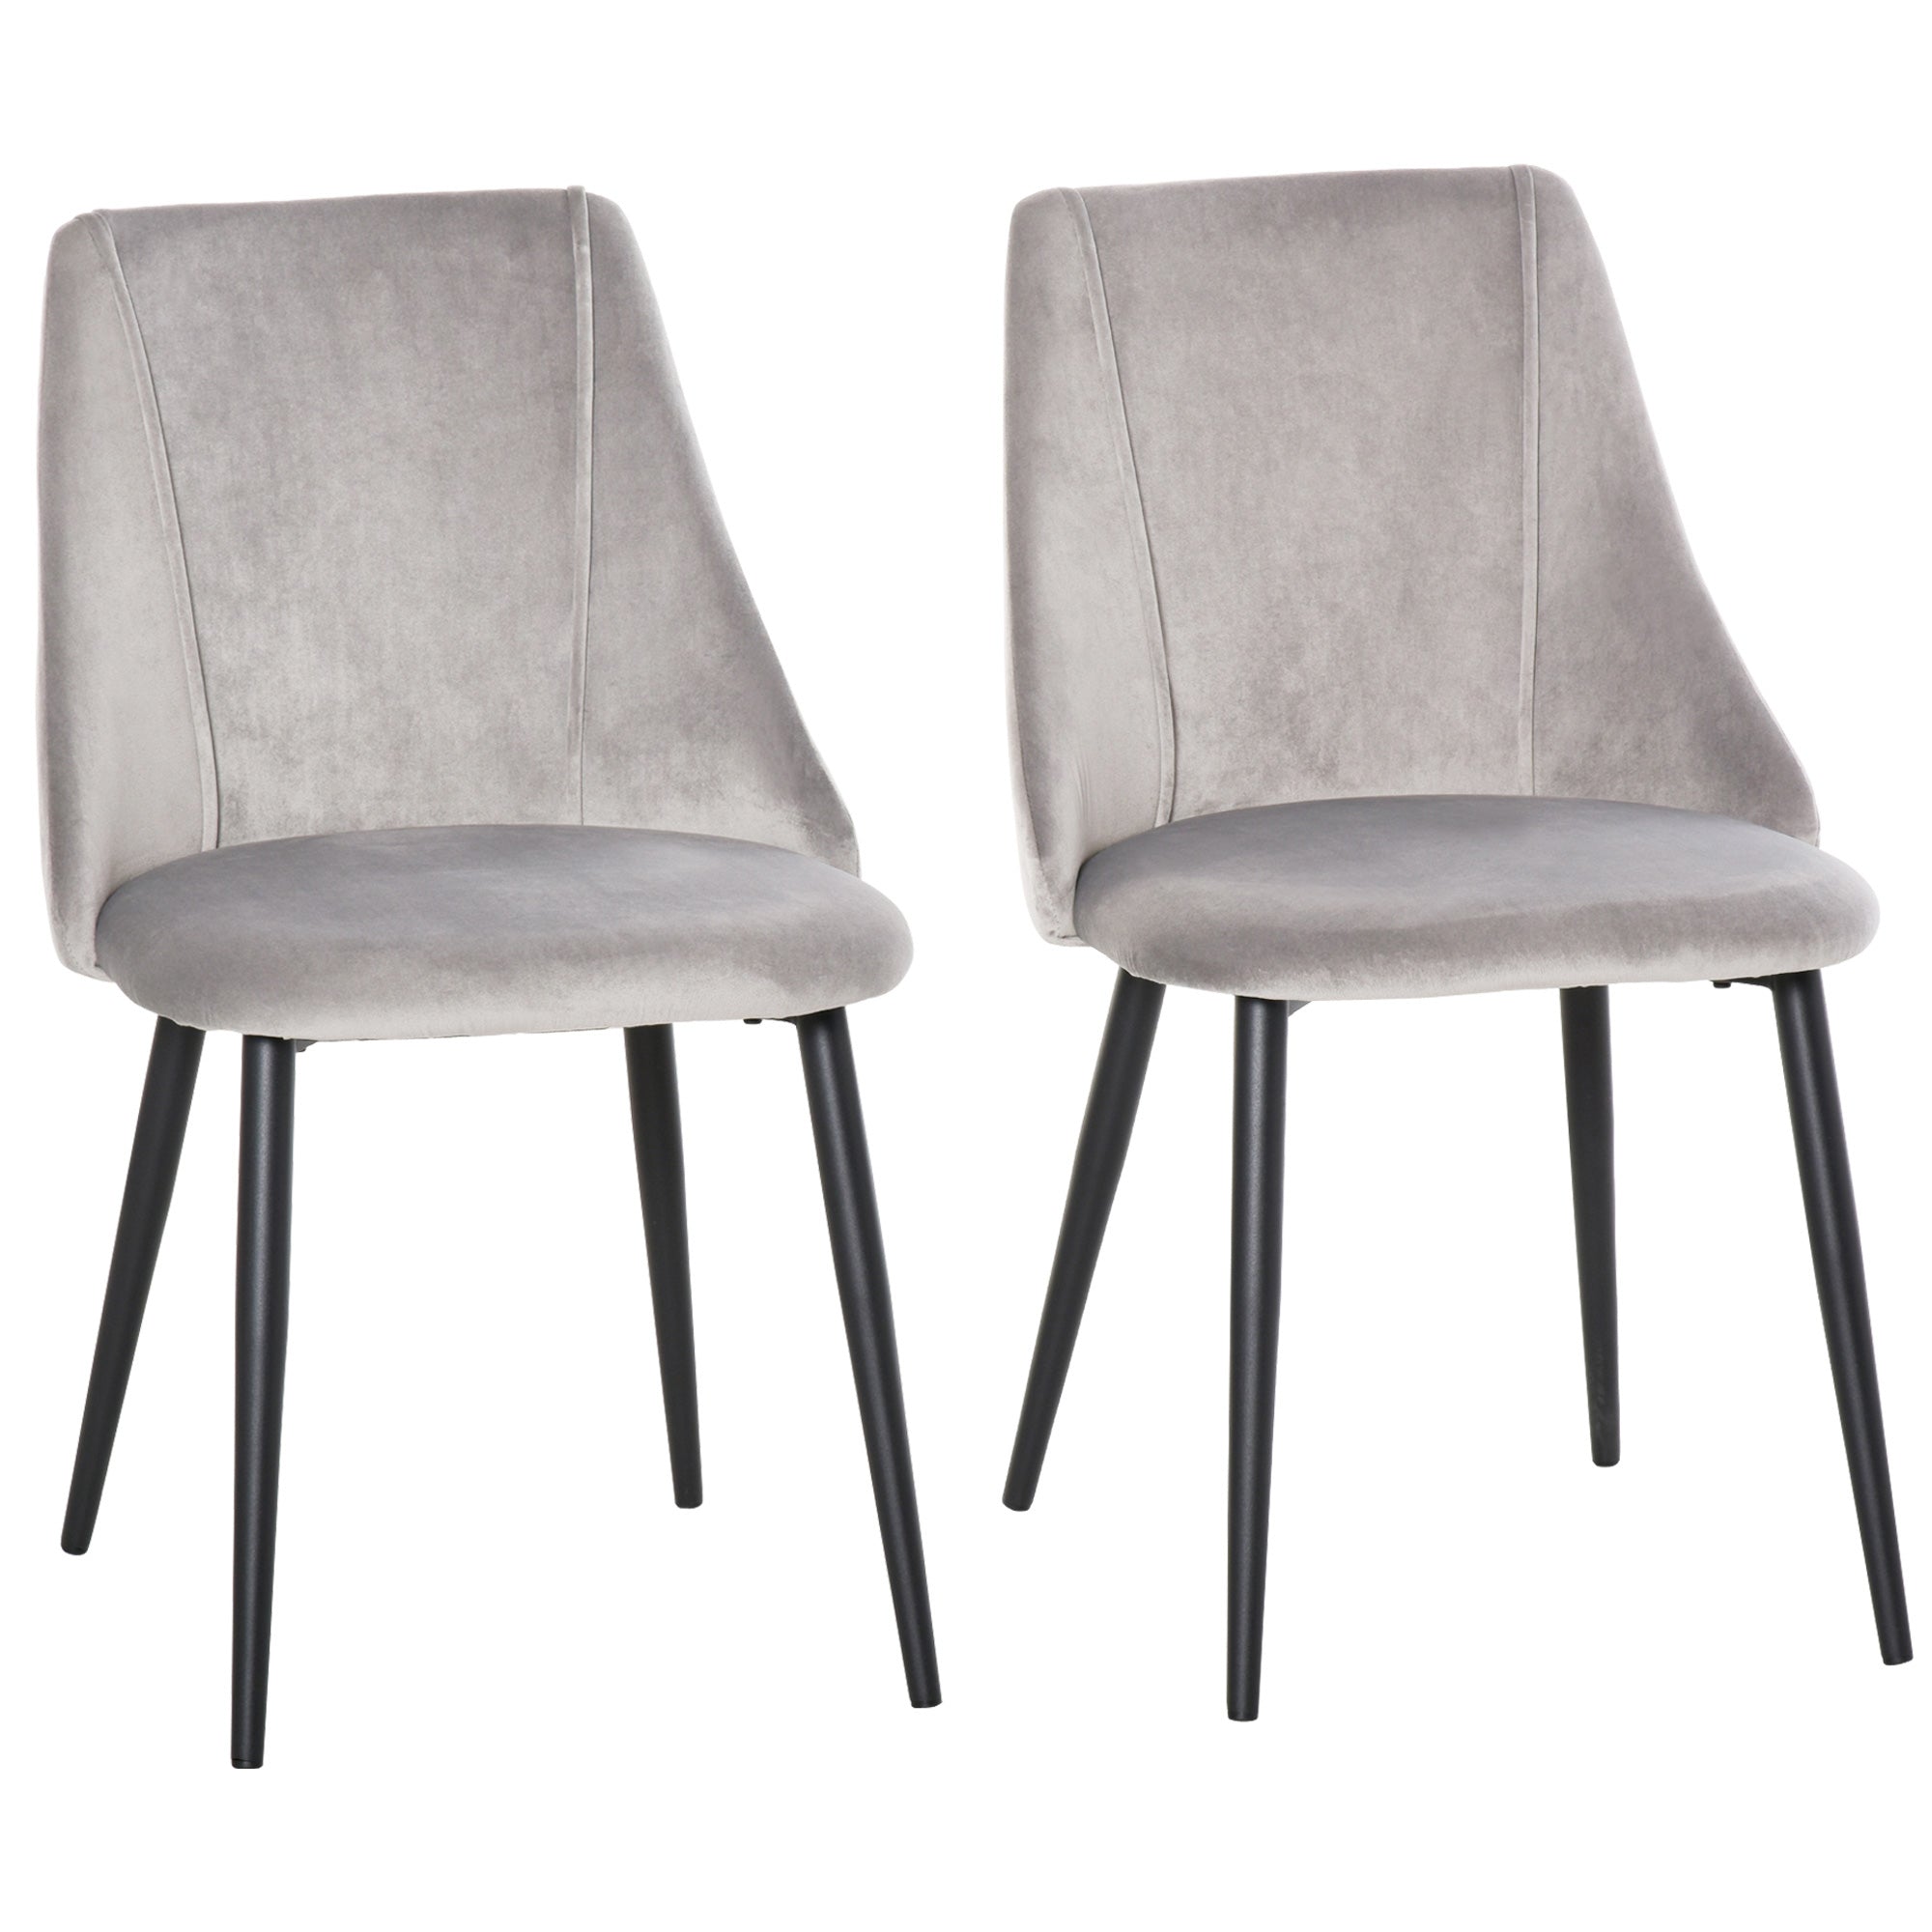 HOMCOM Dining Chairs Set of 2, Modern Upholstered Velvet-Touch Fabric Accent High Back Chairs with Metal Legs, Grey - TovaHaus